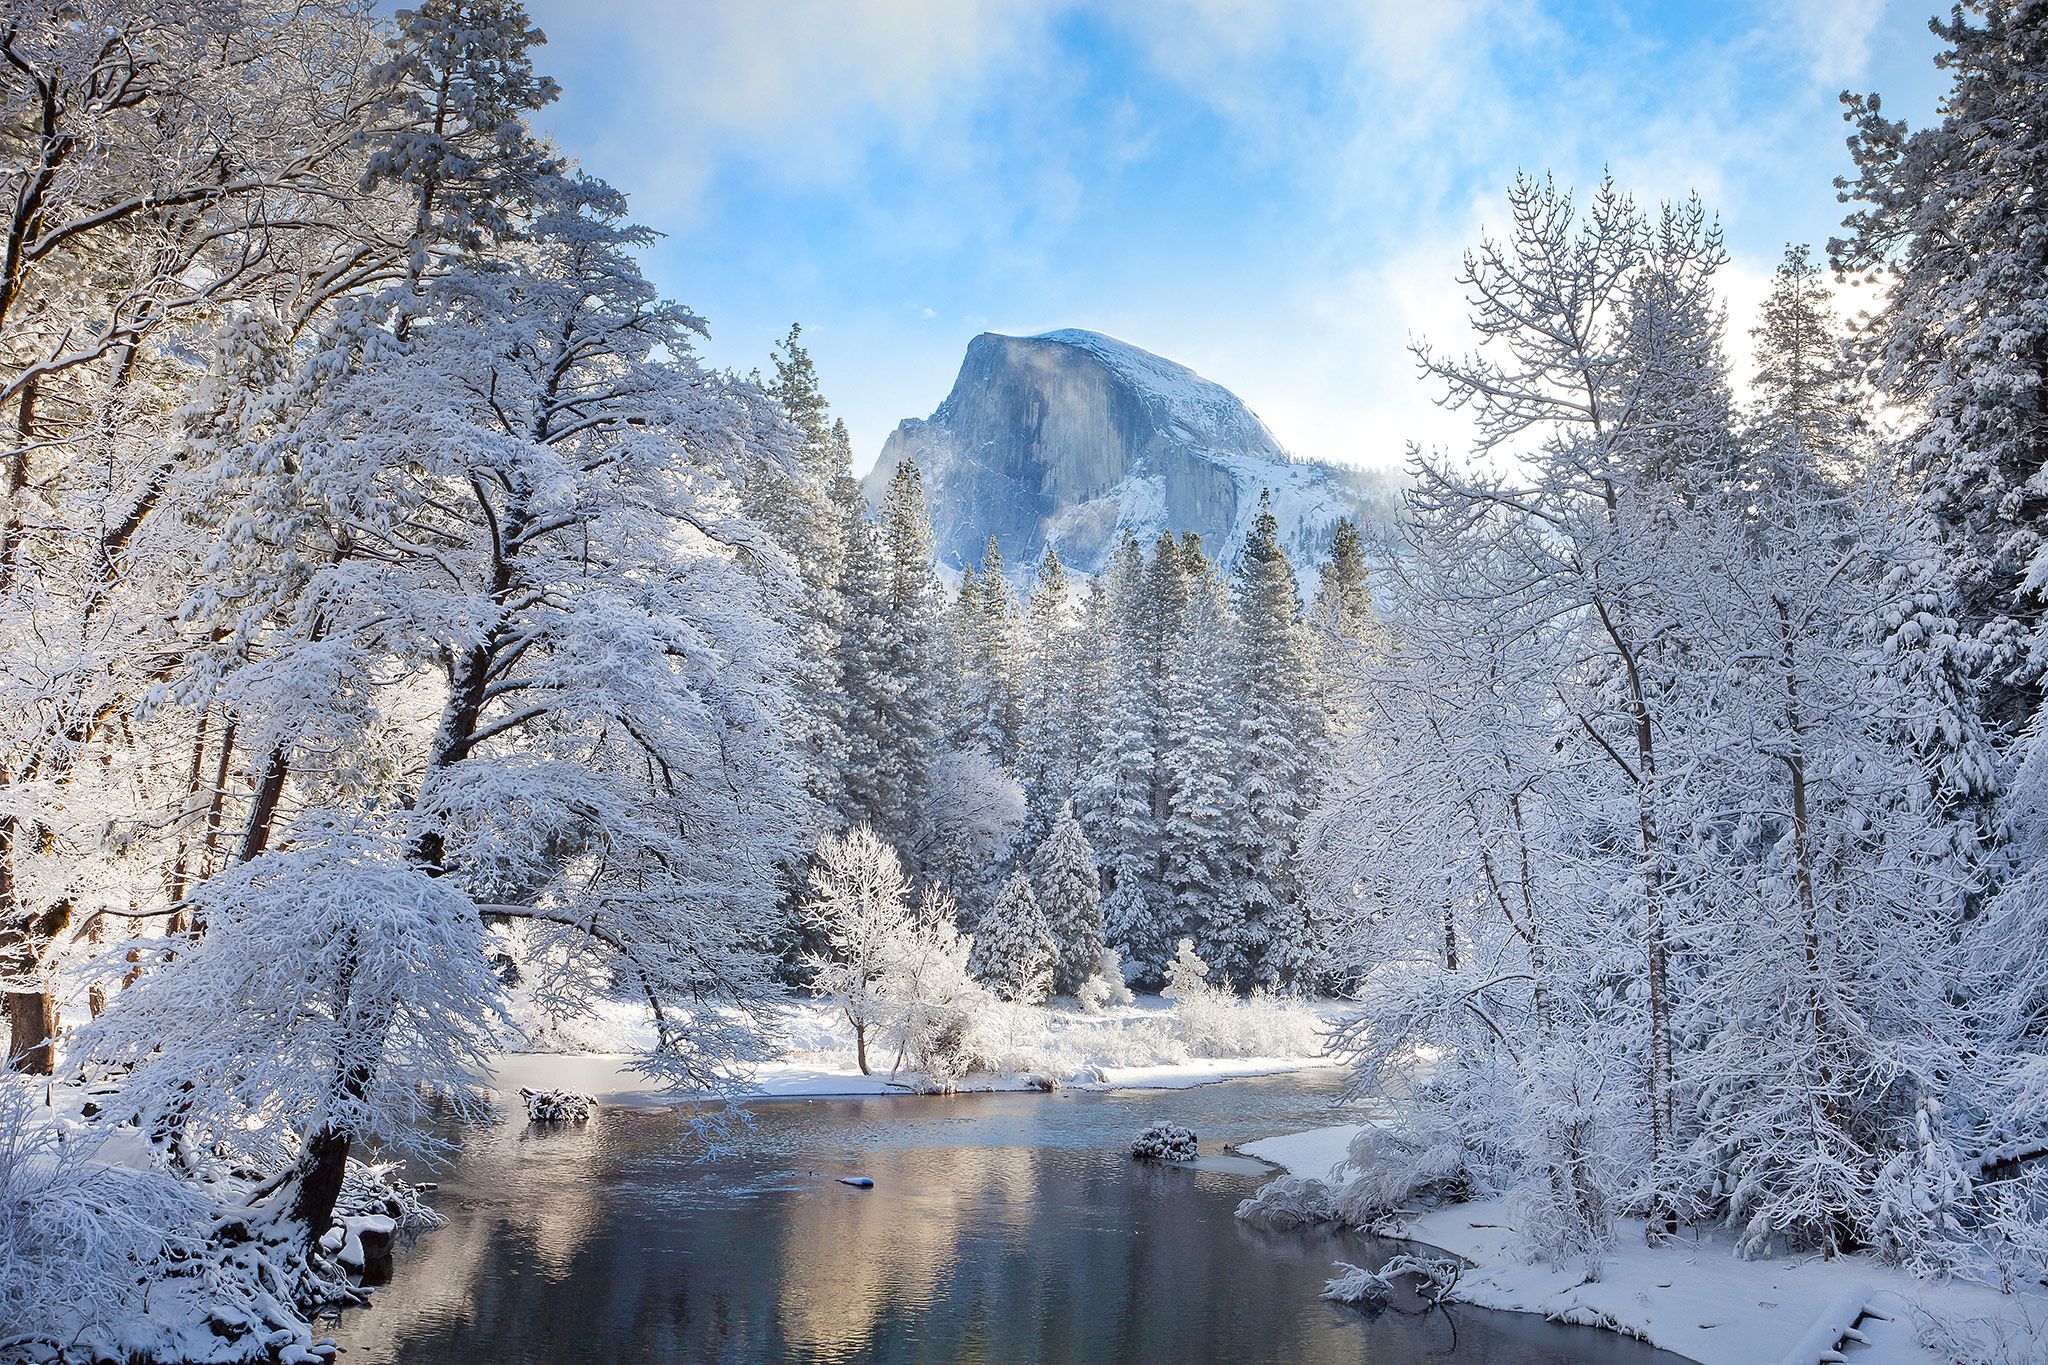 Beautiful photo of U.S. National Parks during winter